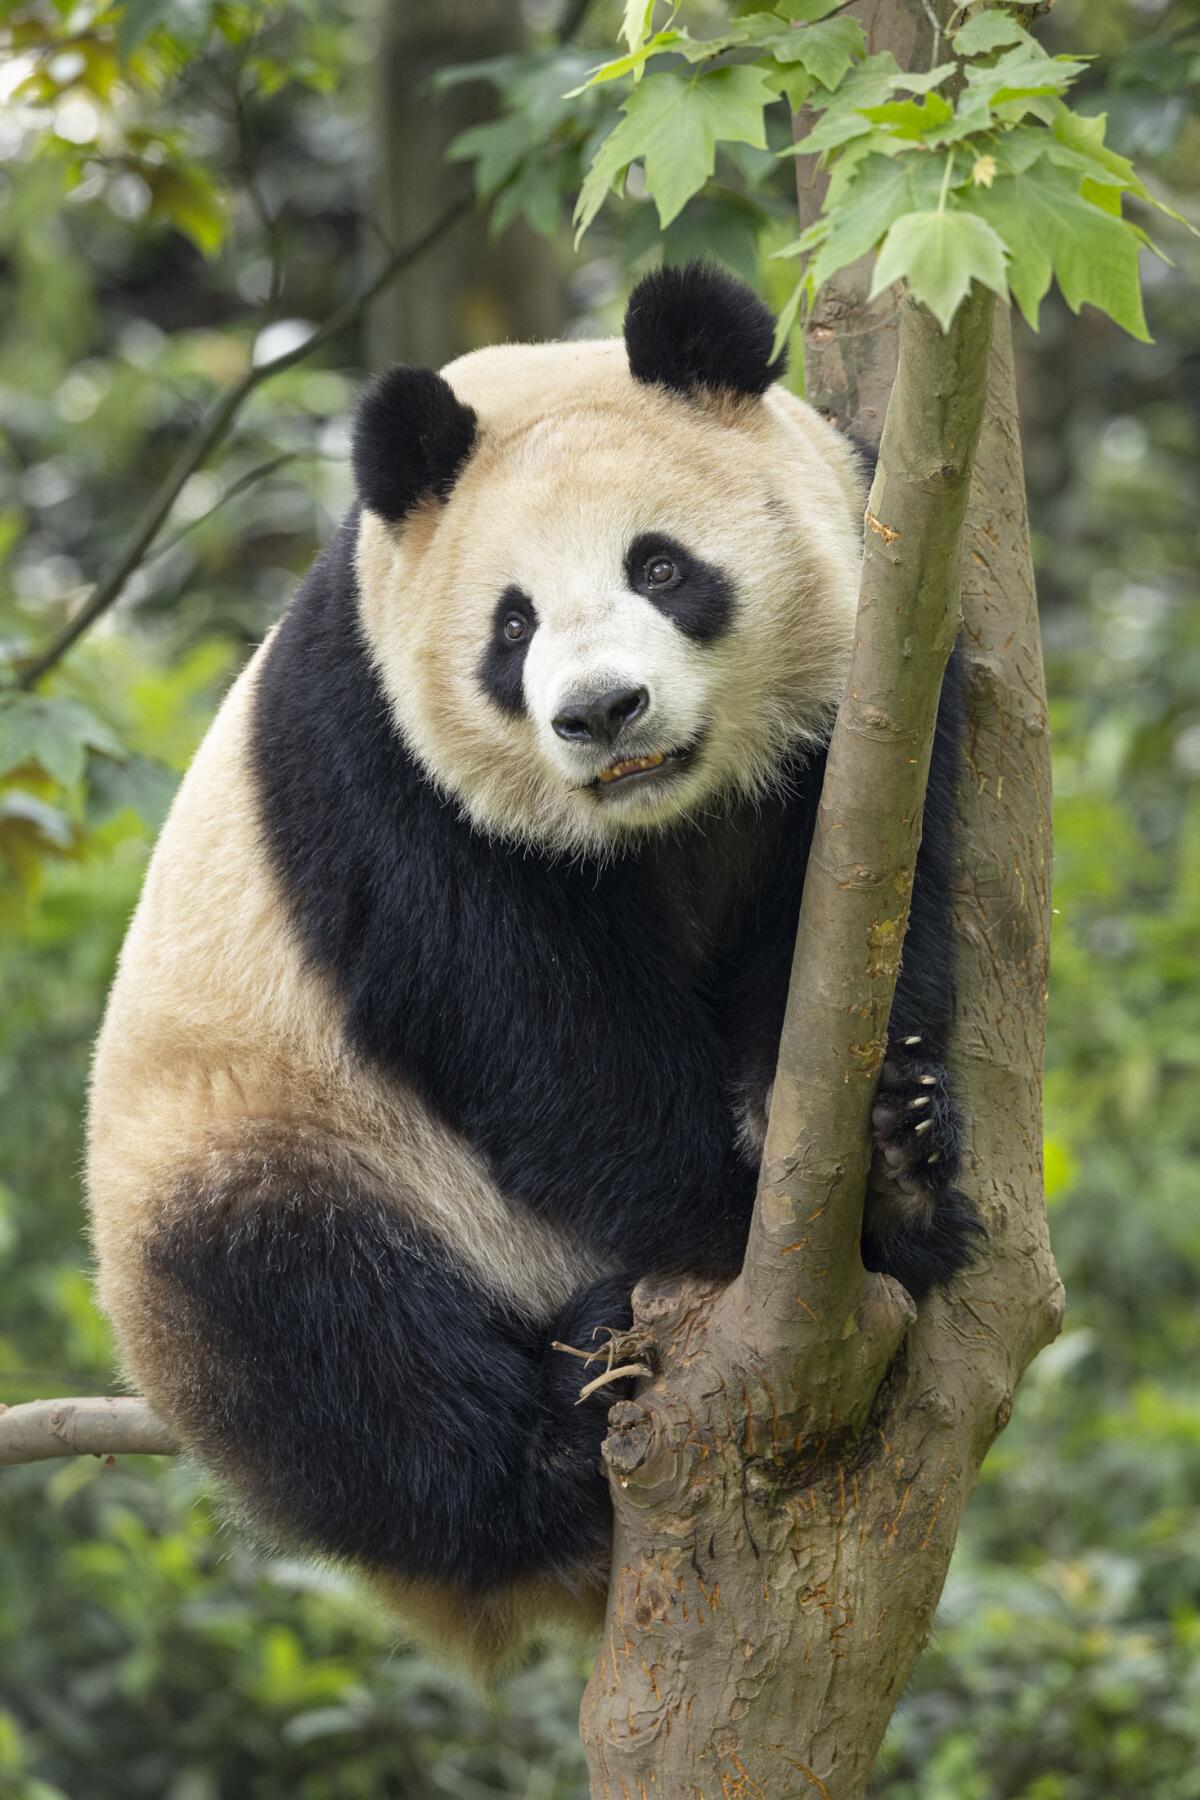 Xin Bao, a nearly 4-year-old female giant panda, is slated to come to San Diego under a breeding loan.